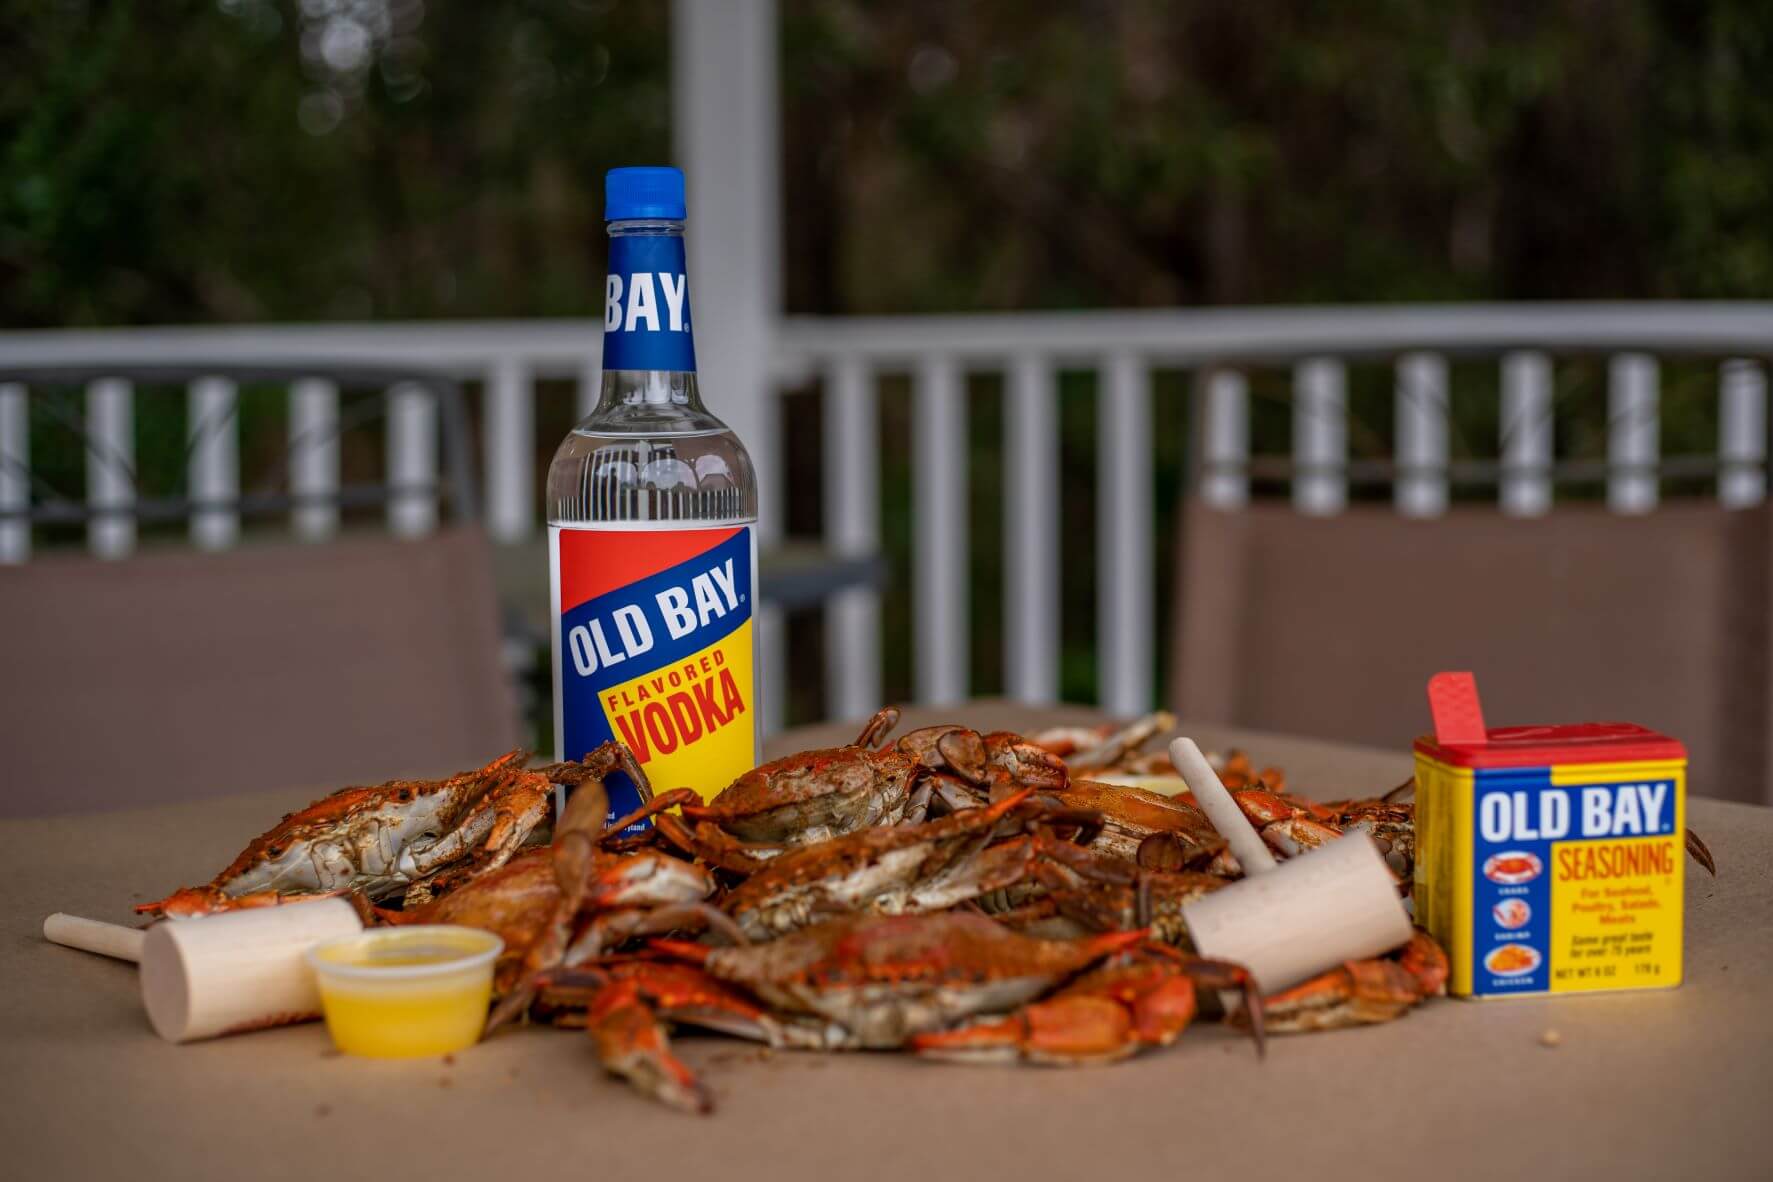 Old Bay Vodka surrounded by Maryland crabs